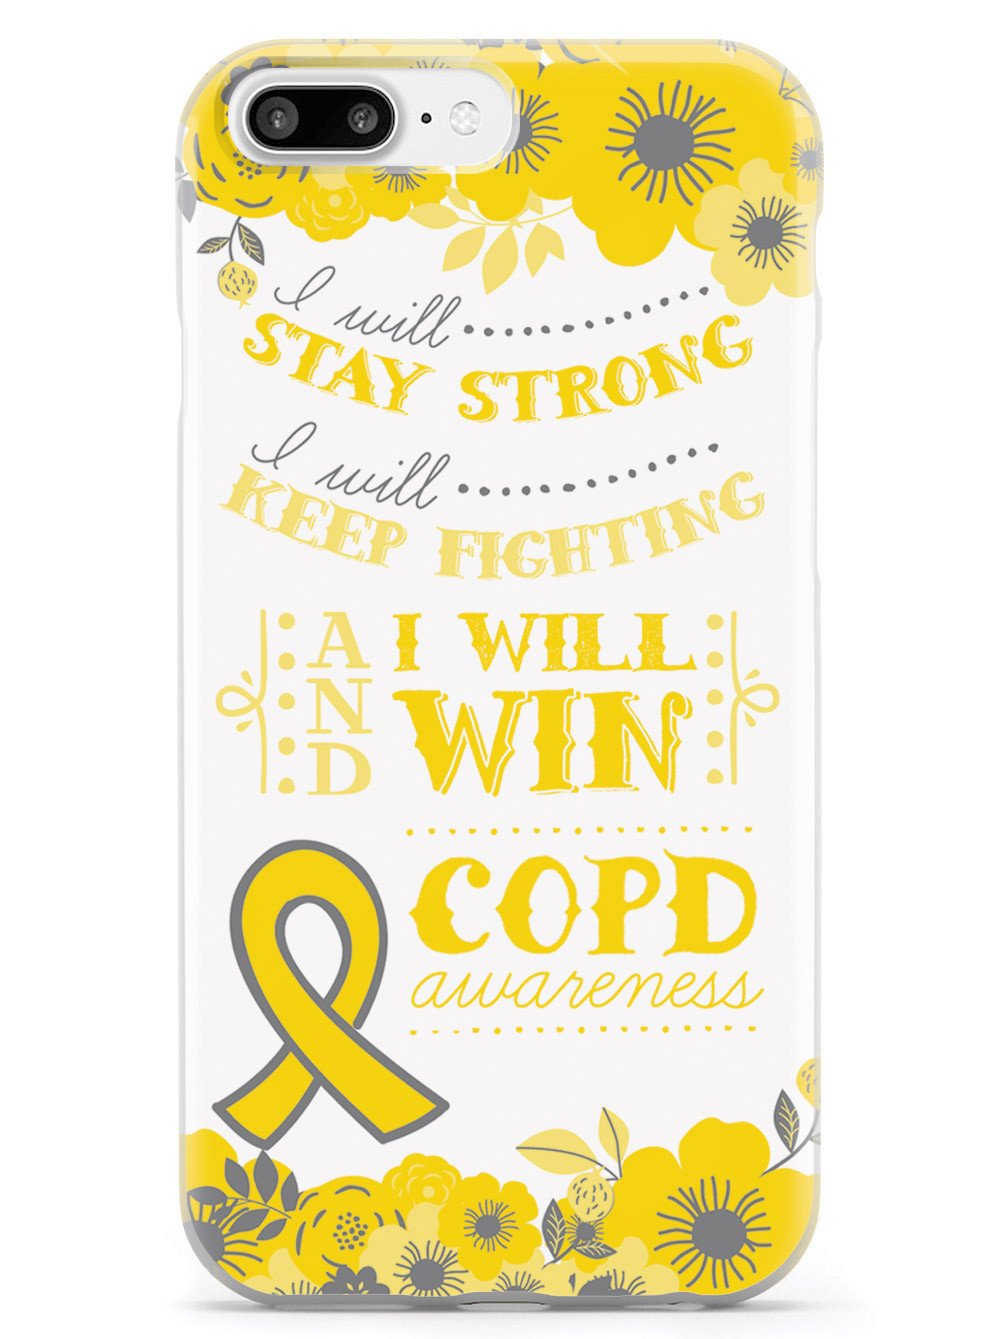 I Will Win - COPD Awareness Case